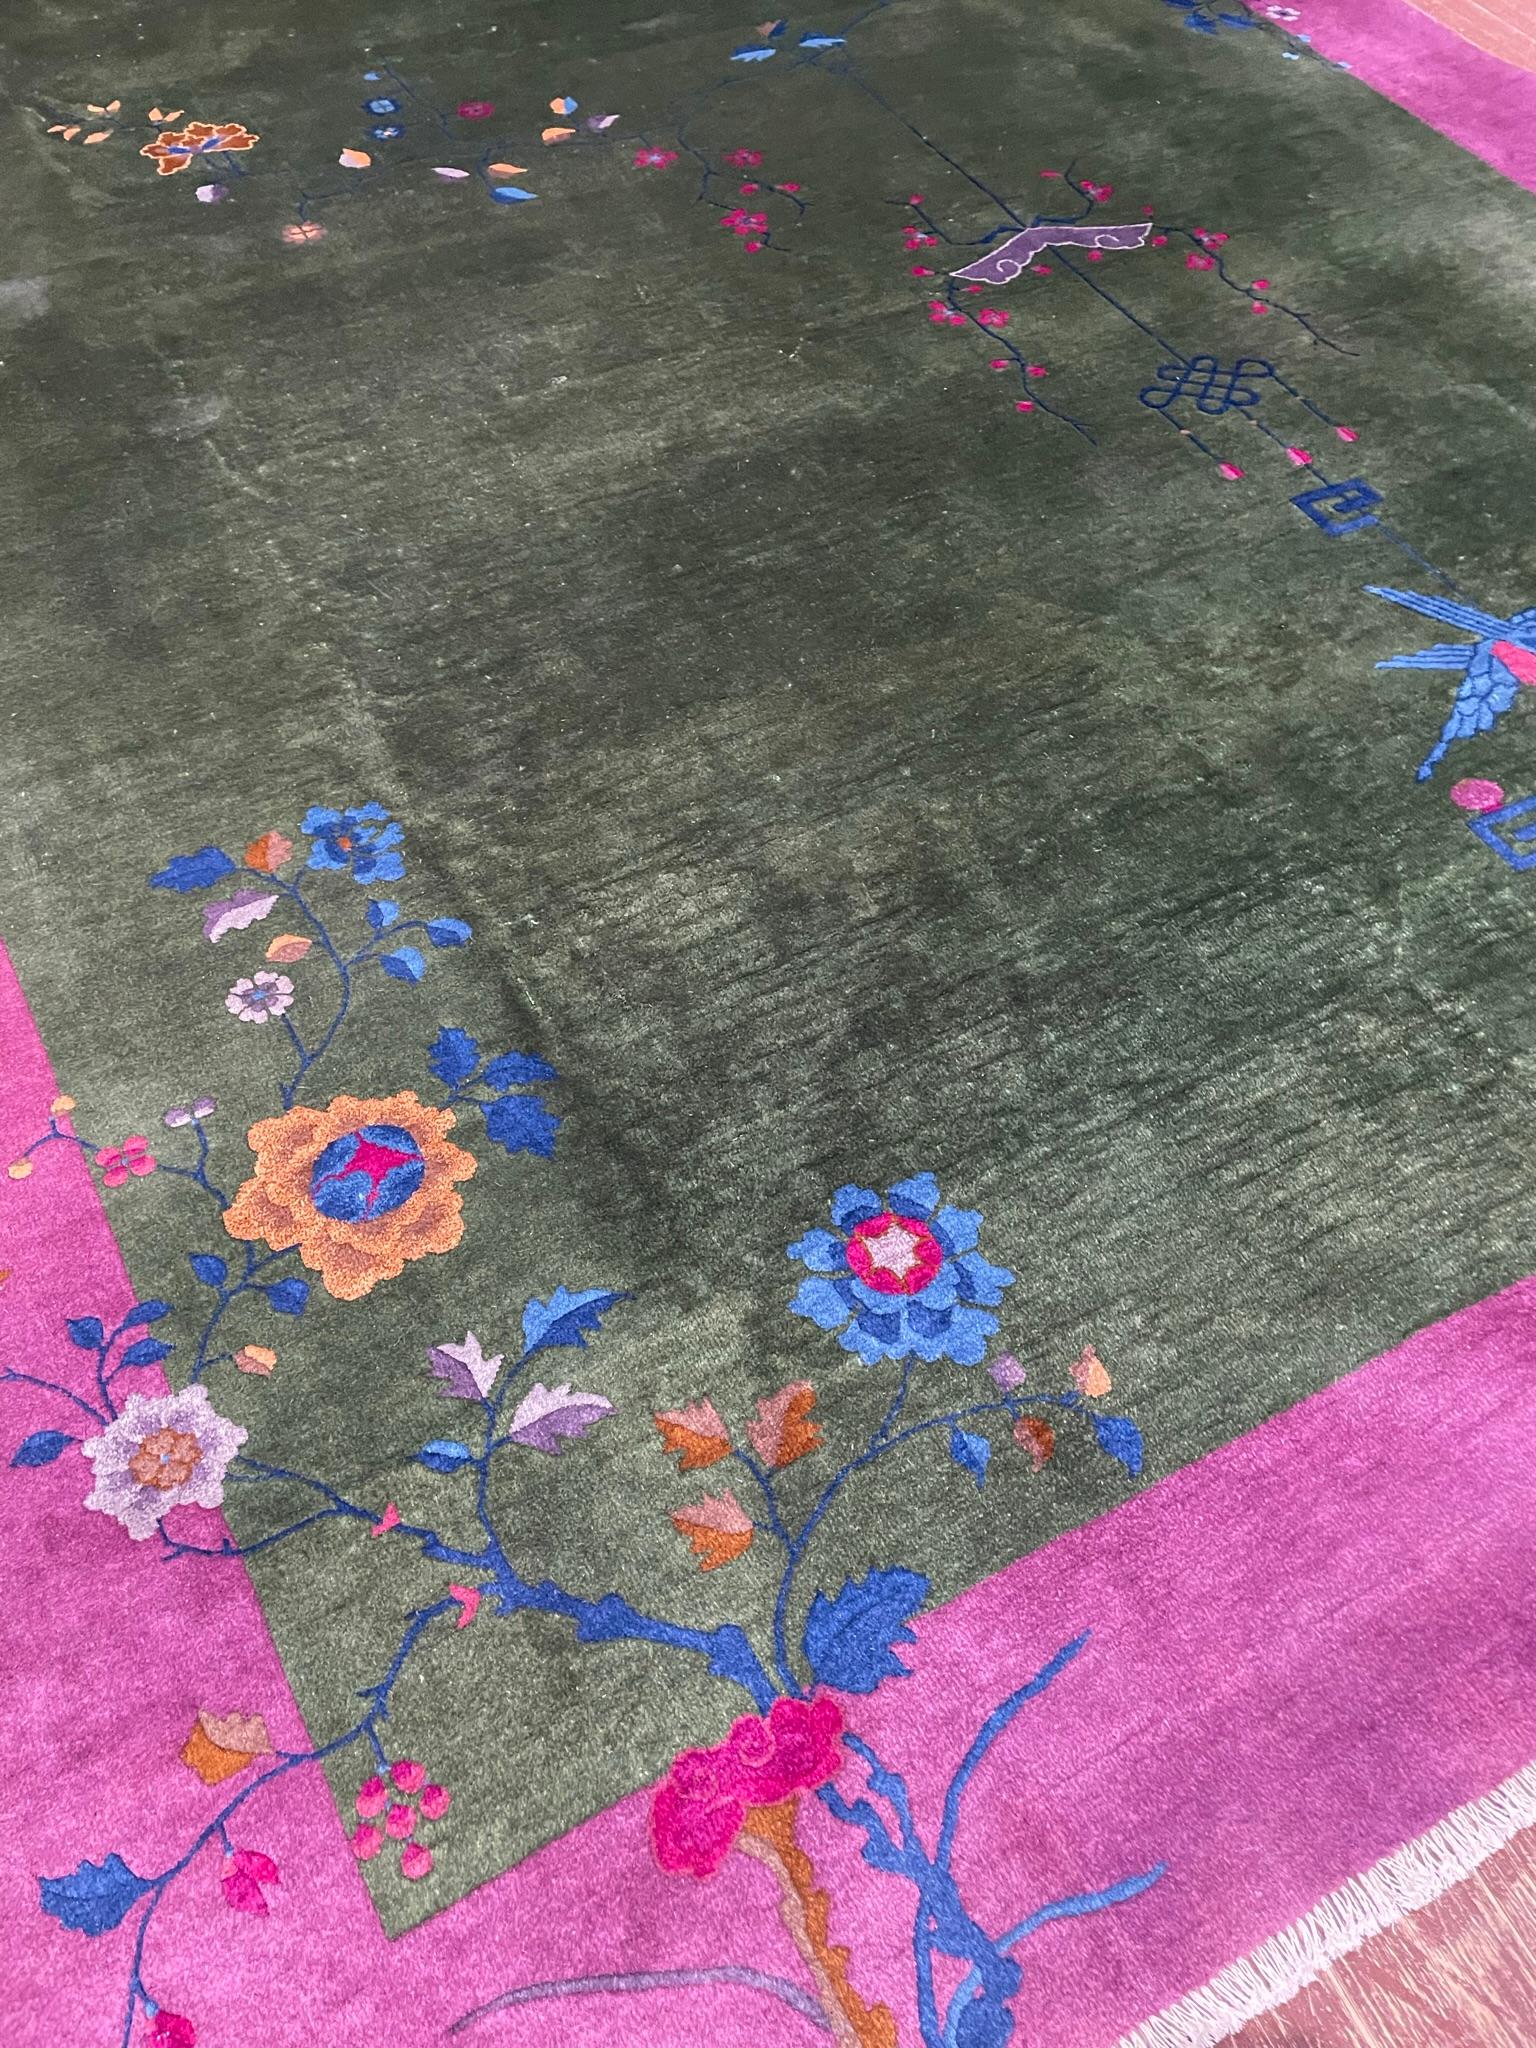 This Rug is in excellent condition with high pile throughout the rug, cleaned and no stained, the ends and bindings of the rug are intact as original and there has not been any repairs. There are no tears, breaks or holes.
The materials are from